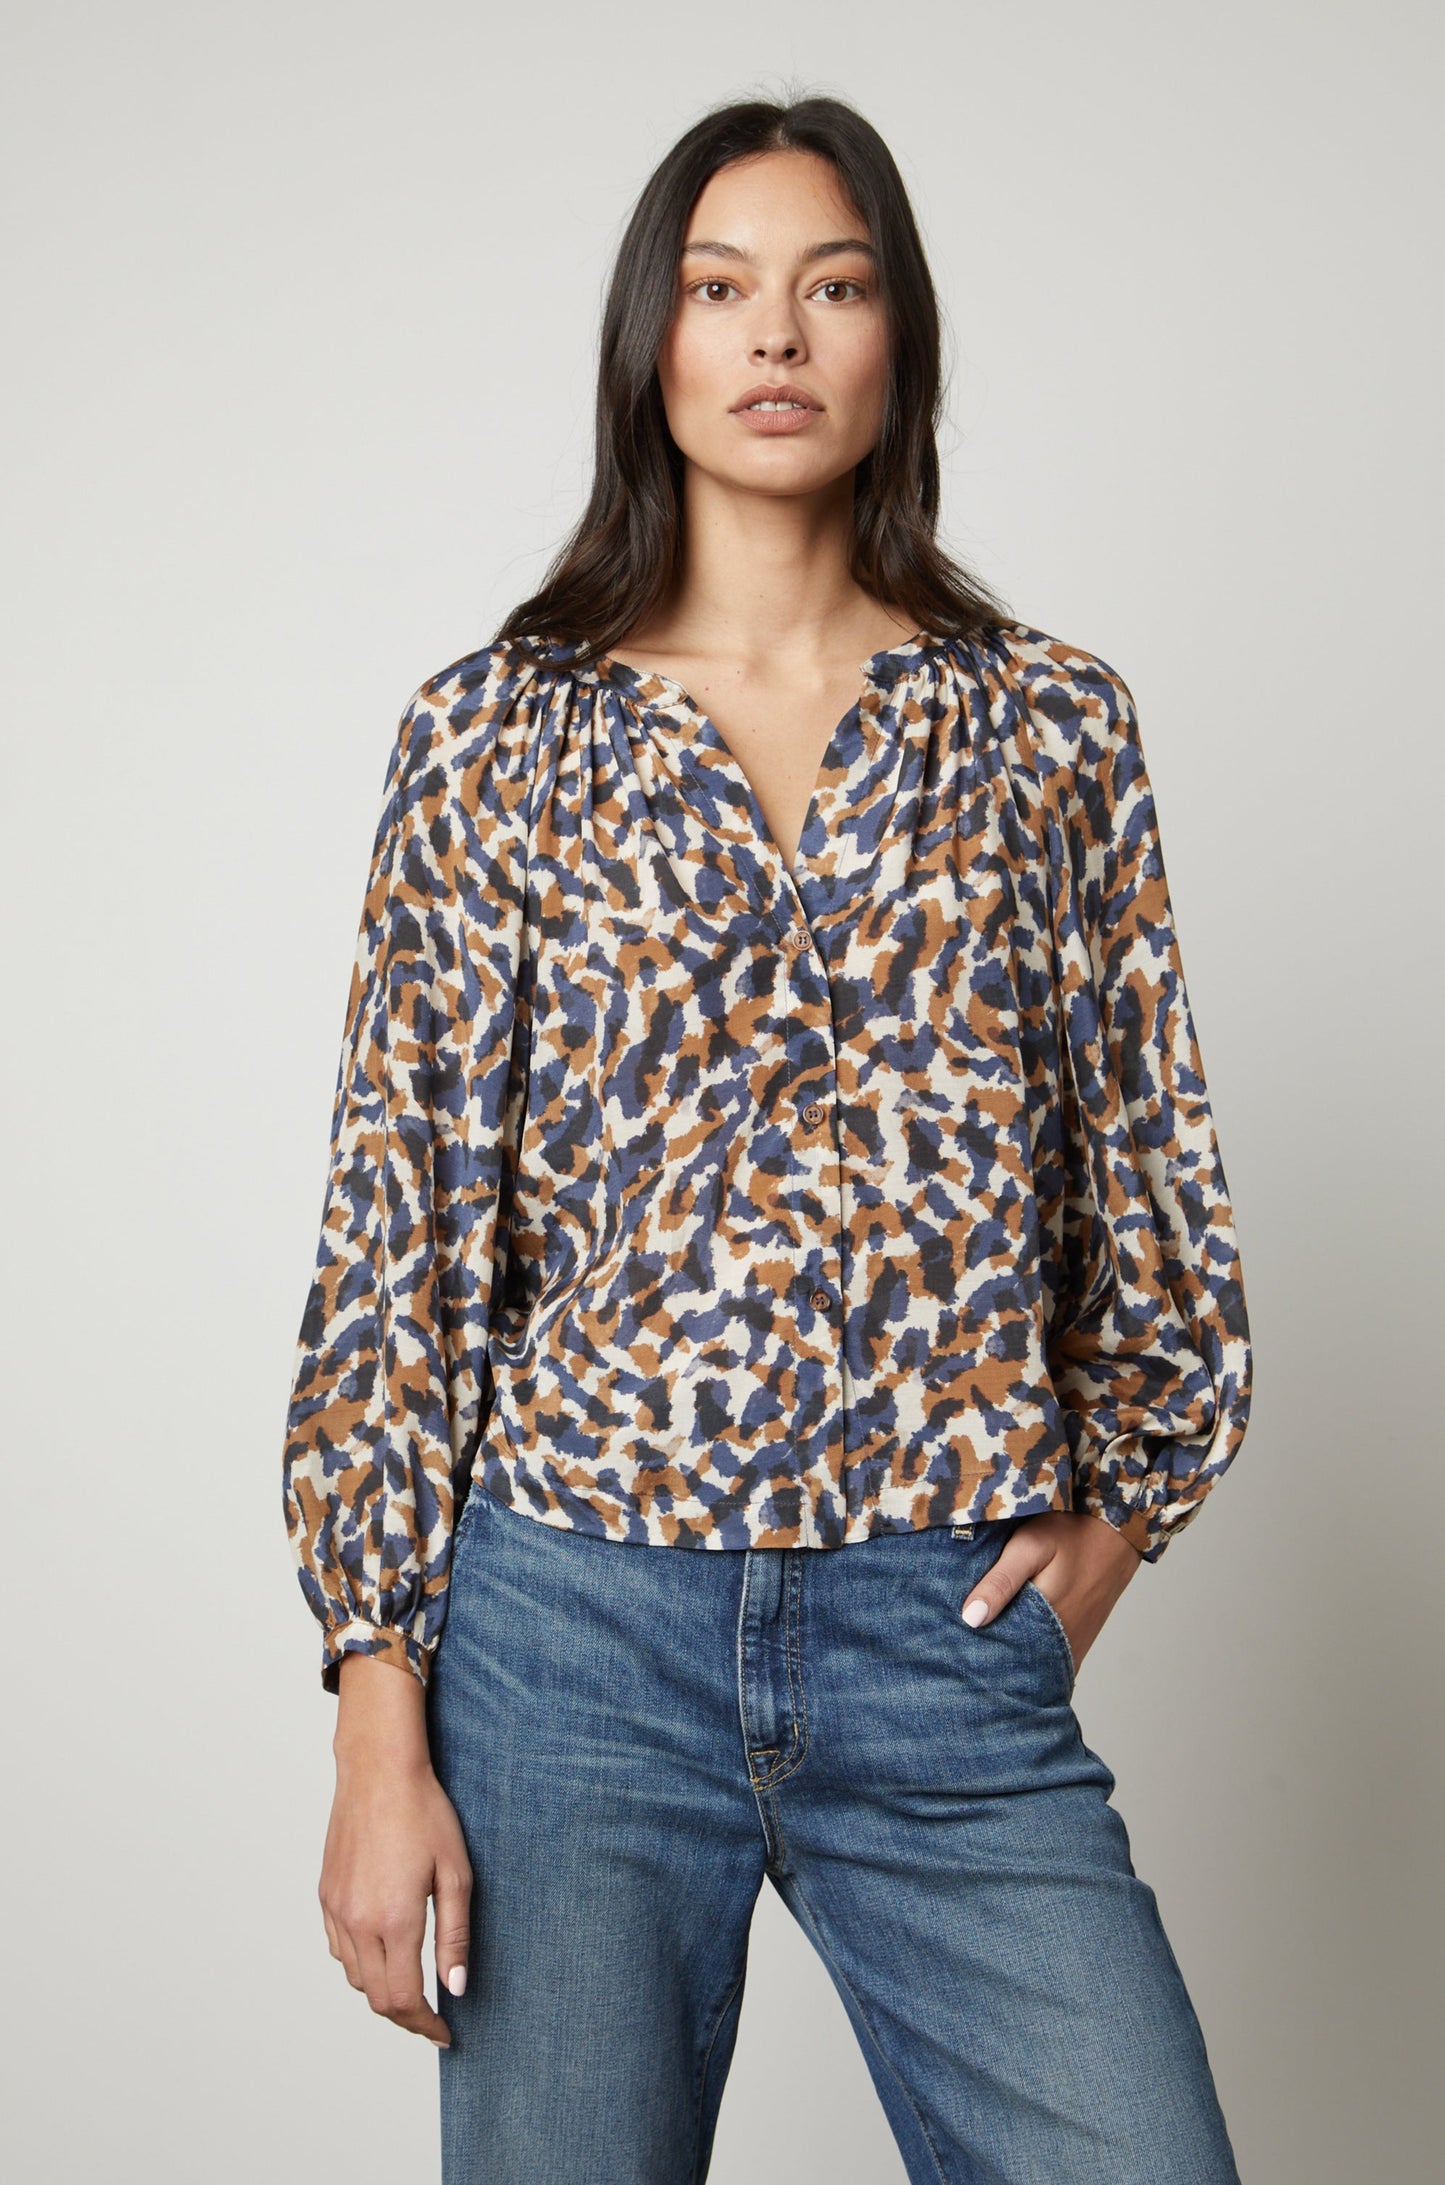 The model is wearing jeans and a Velvet by Graham & Spencer Melinda Printed Button-Up Top.-26895474491585